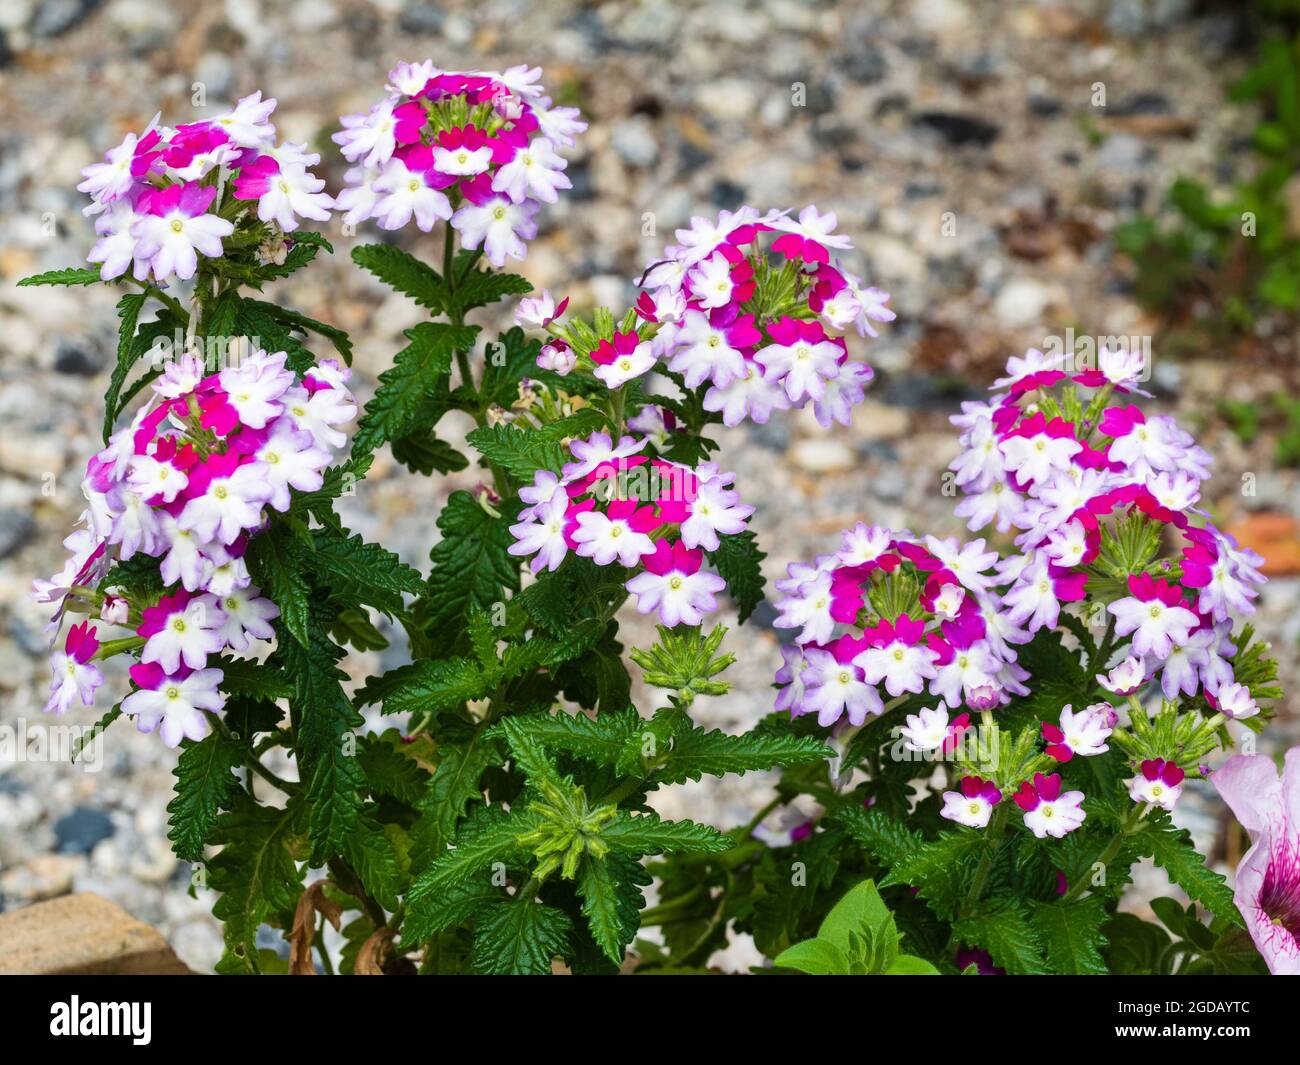 Striking white, red and purple flowers of the tender summer flowering container plant, Verbena 'Sparkle Purple Blues' Stock Photo